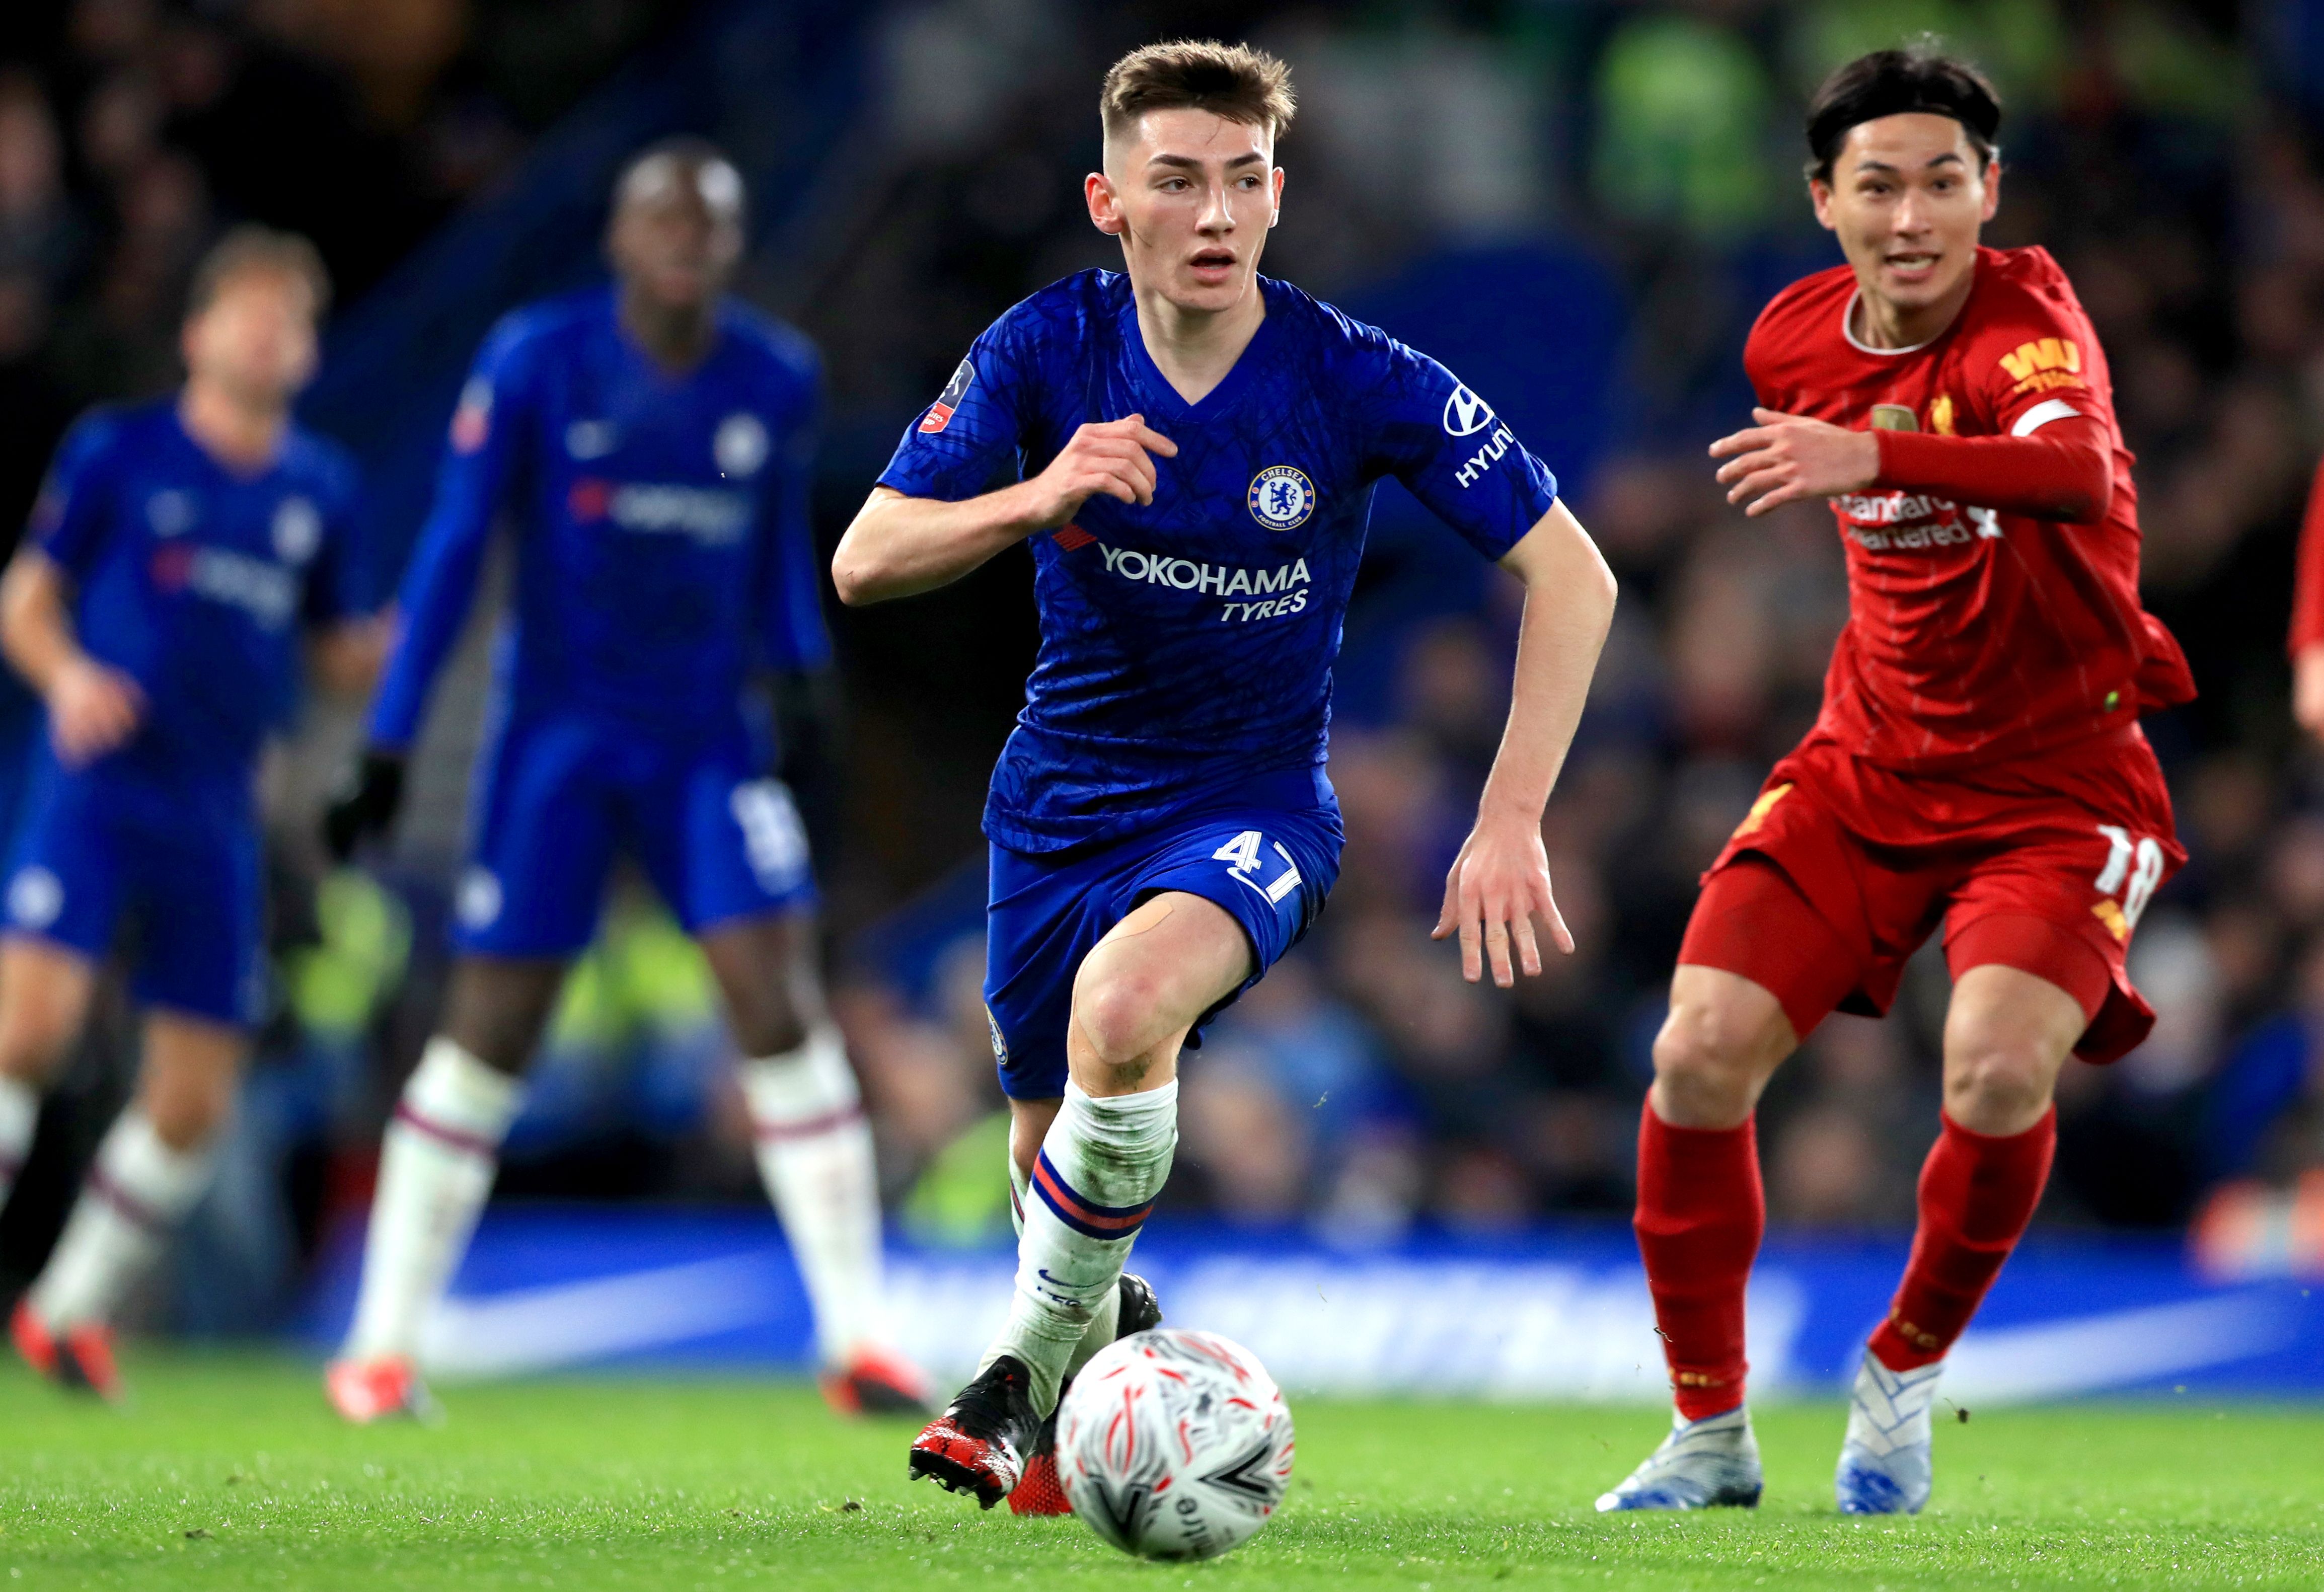 Billy Gilmour Sent Fabinho Back To Monaco With Filthy Nutmeg